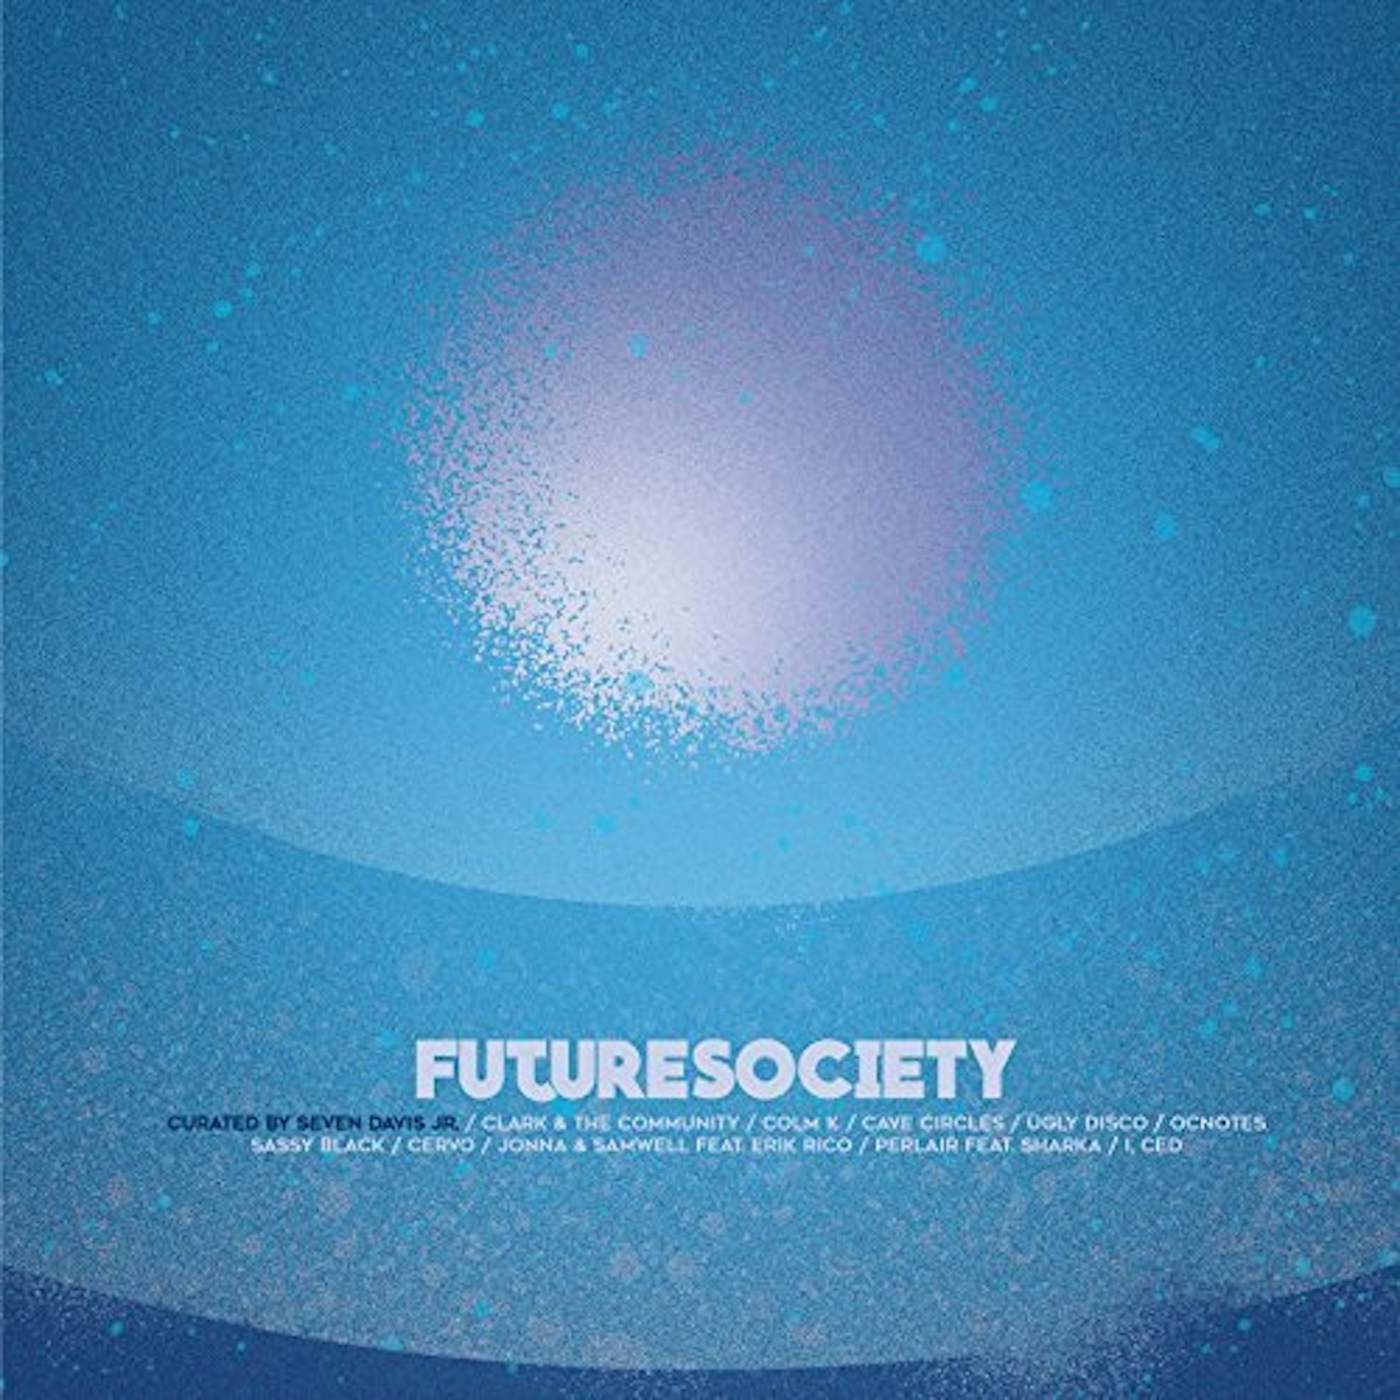 FUTURE SOCIETY - CURATED BY SEVEN DAVIS / VARIOUS